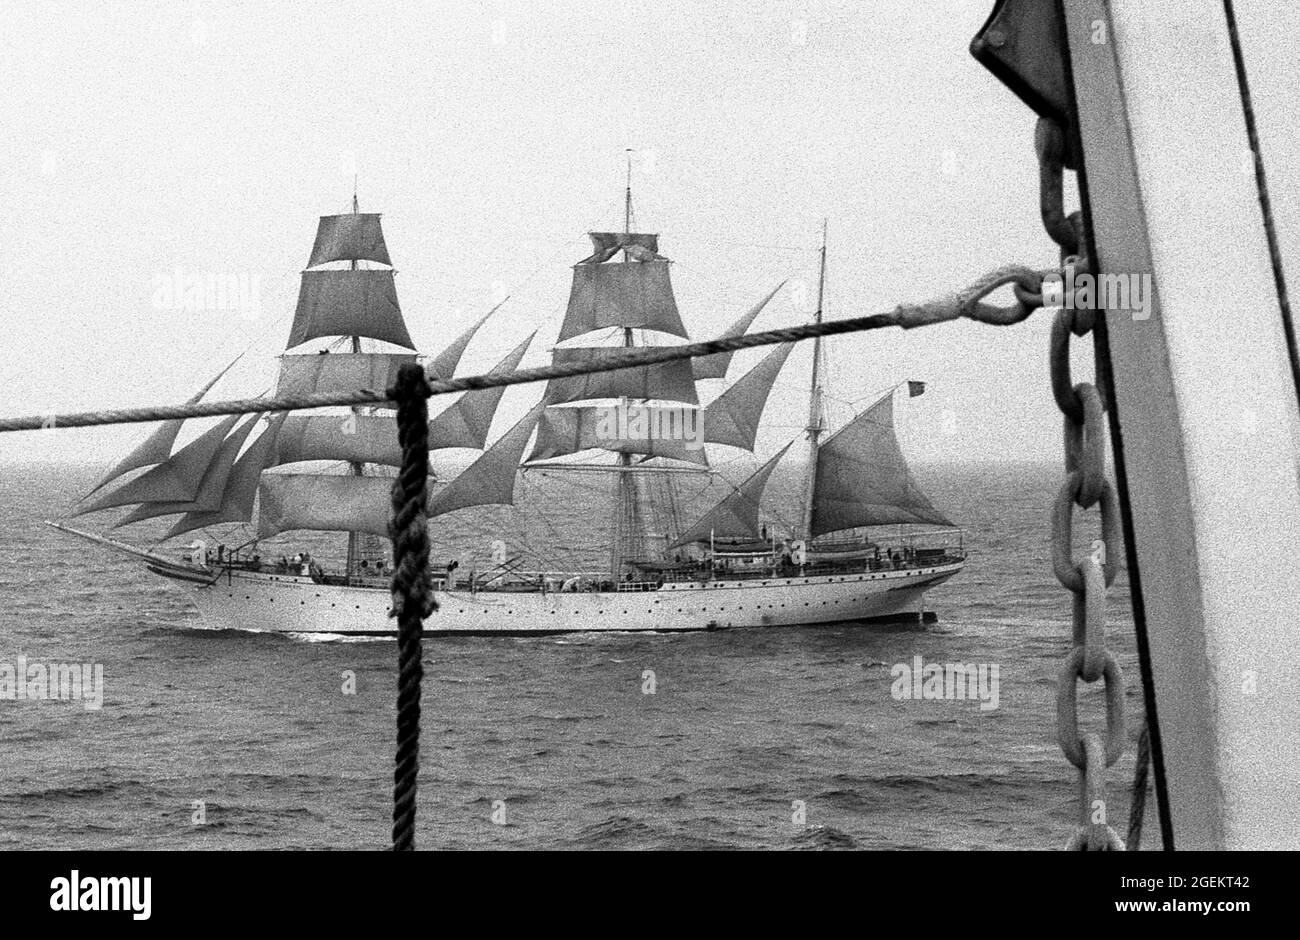 AJAXNETPHOTO. AUGUST, 1966. AT SEA, ENGLISH CHANNEL. - WESTWARD HO! - THE NORWEGIAN SAIL TRAINING SHIP STATSRAAD LEHMKUHL SEEN FROM A PASSING MOTOR SHIP HEADING WEST DOWN CHANNEL UNDER FULL SAIL.  PHOTO:JONATHAN EASTLAND/AJAX.  REF:253627 19A Stock Photo